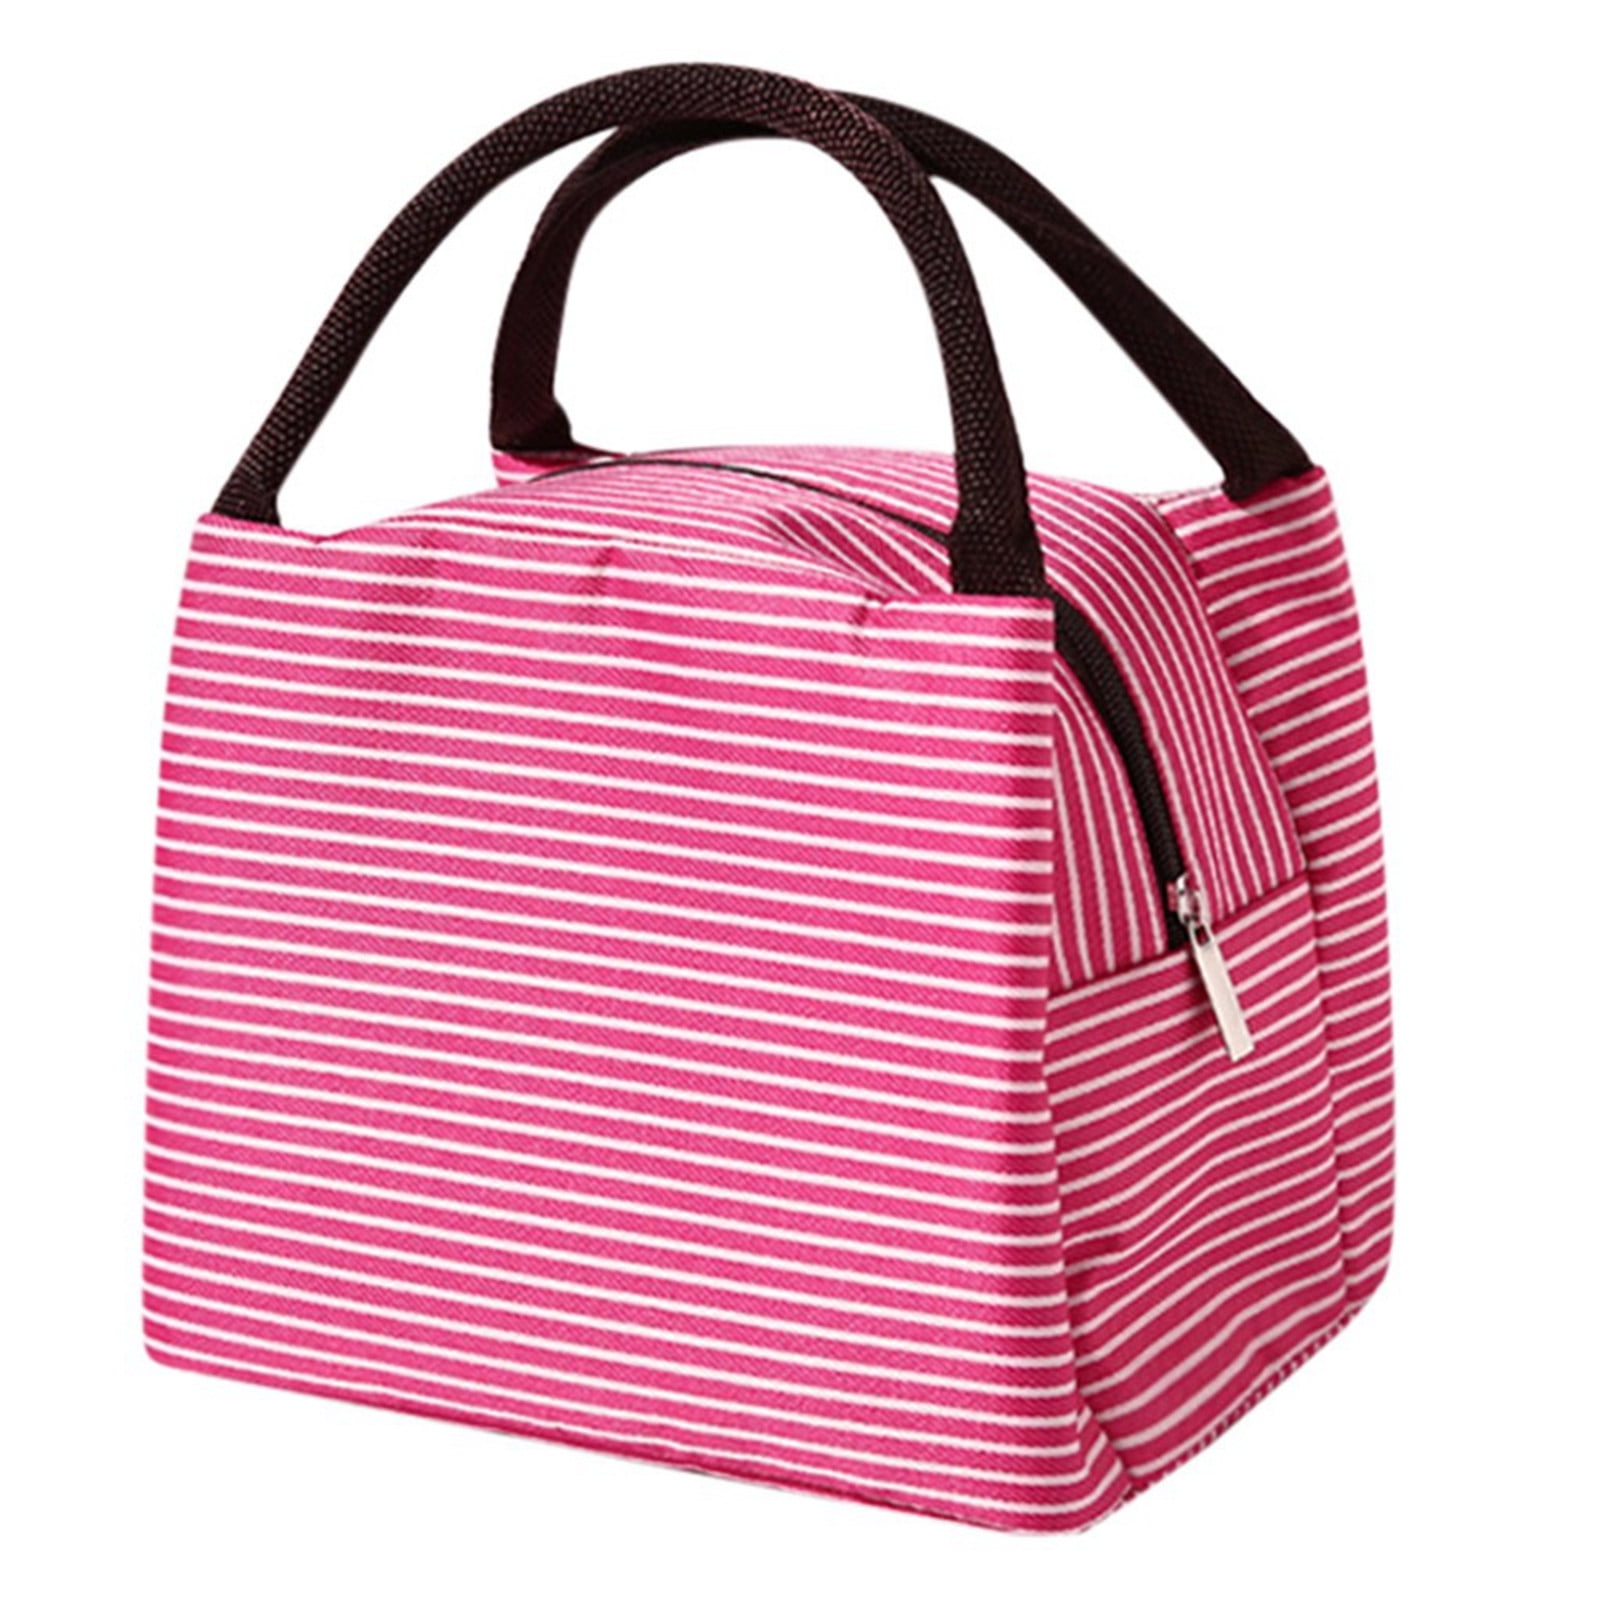  White Polka Dot With Black Lunch Bags for Women Lunch Tote Bag  Lunch Box Water-resistant Thermal Cooler Bag Lunch Organizer for Working  Picnic Beach Sporting: Home & Kitchen